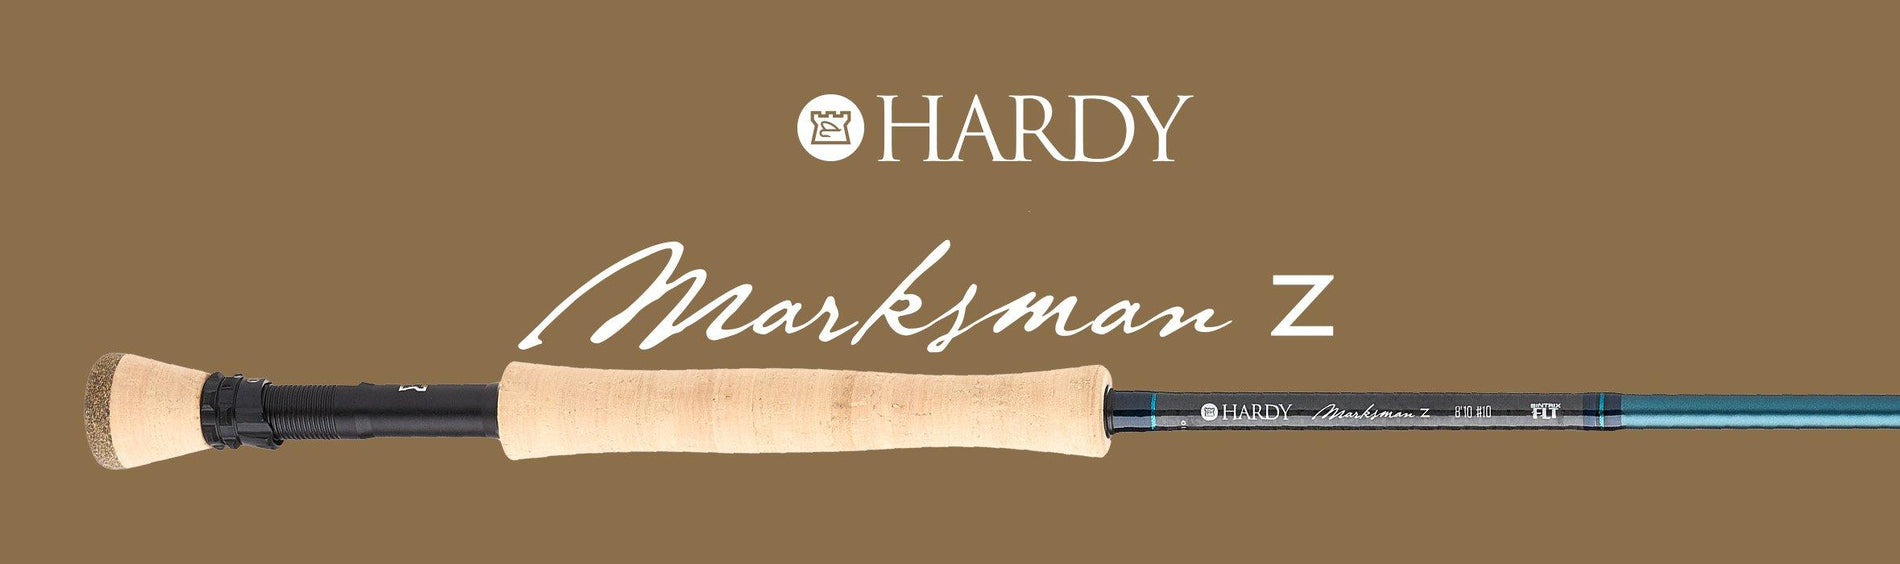 Hardy Marksman Z Review - Fly Rod Reviews - New Saltwater Rods Announced